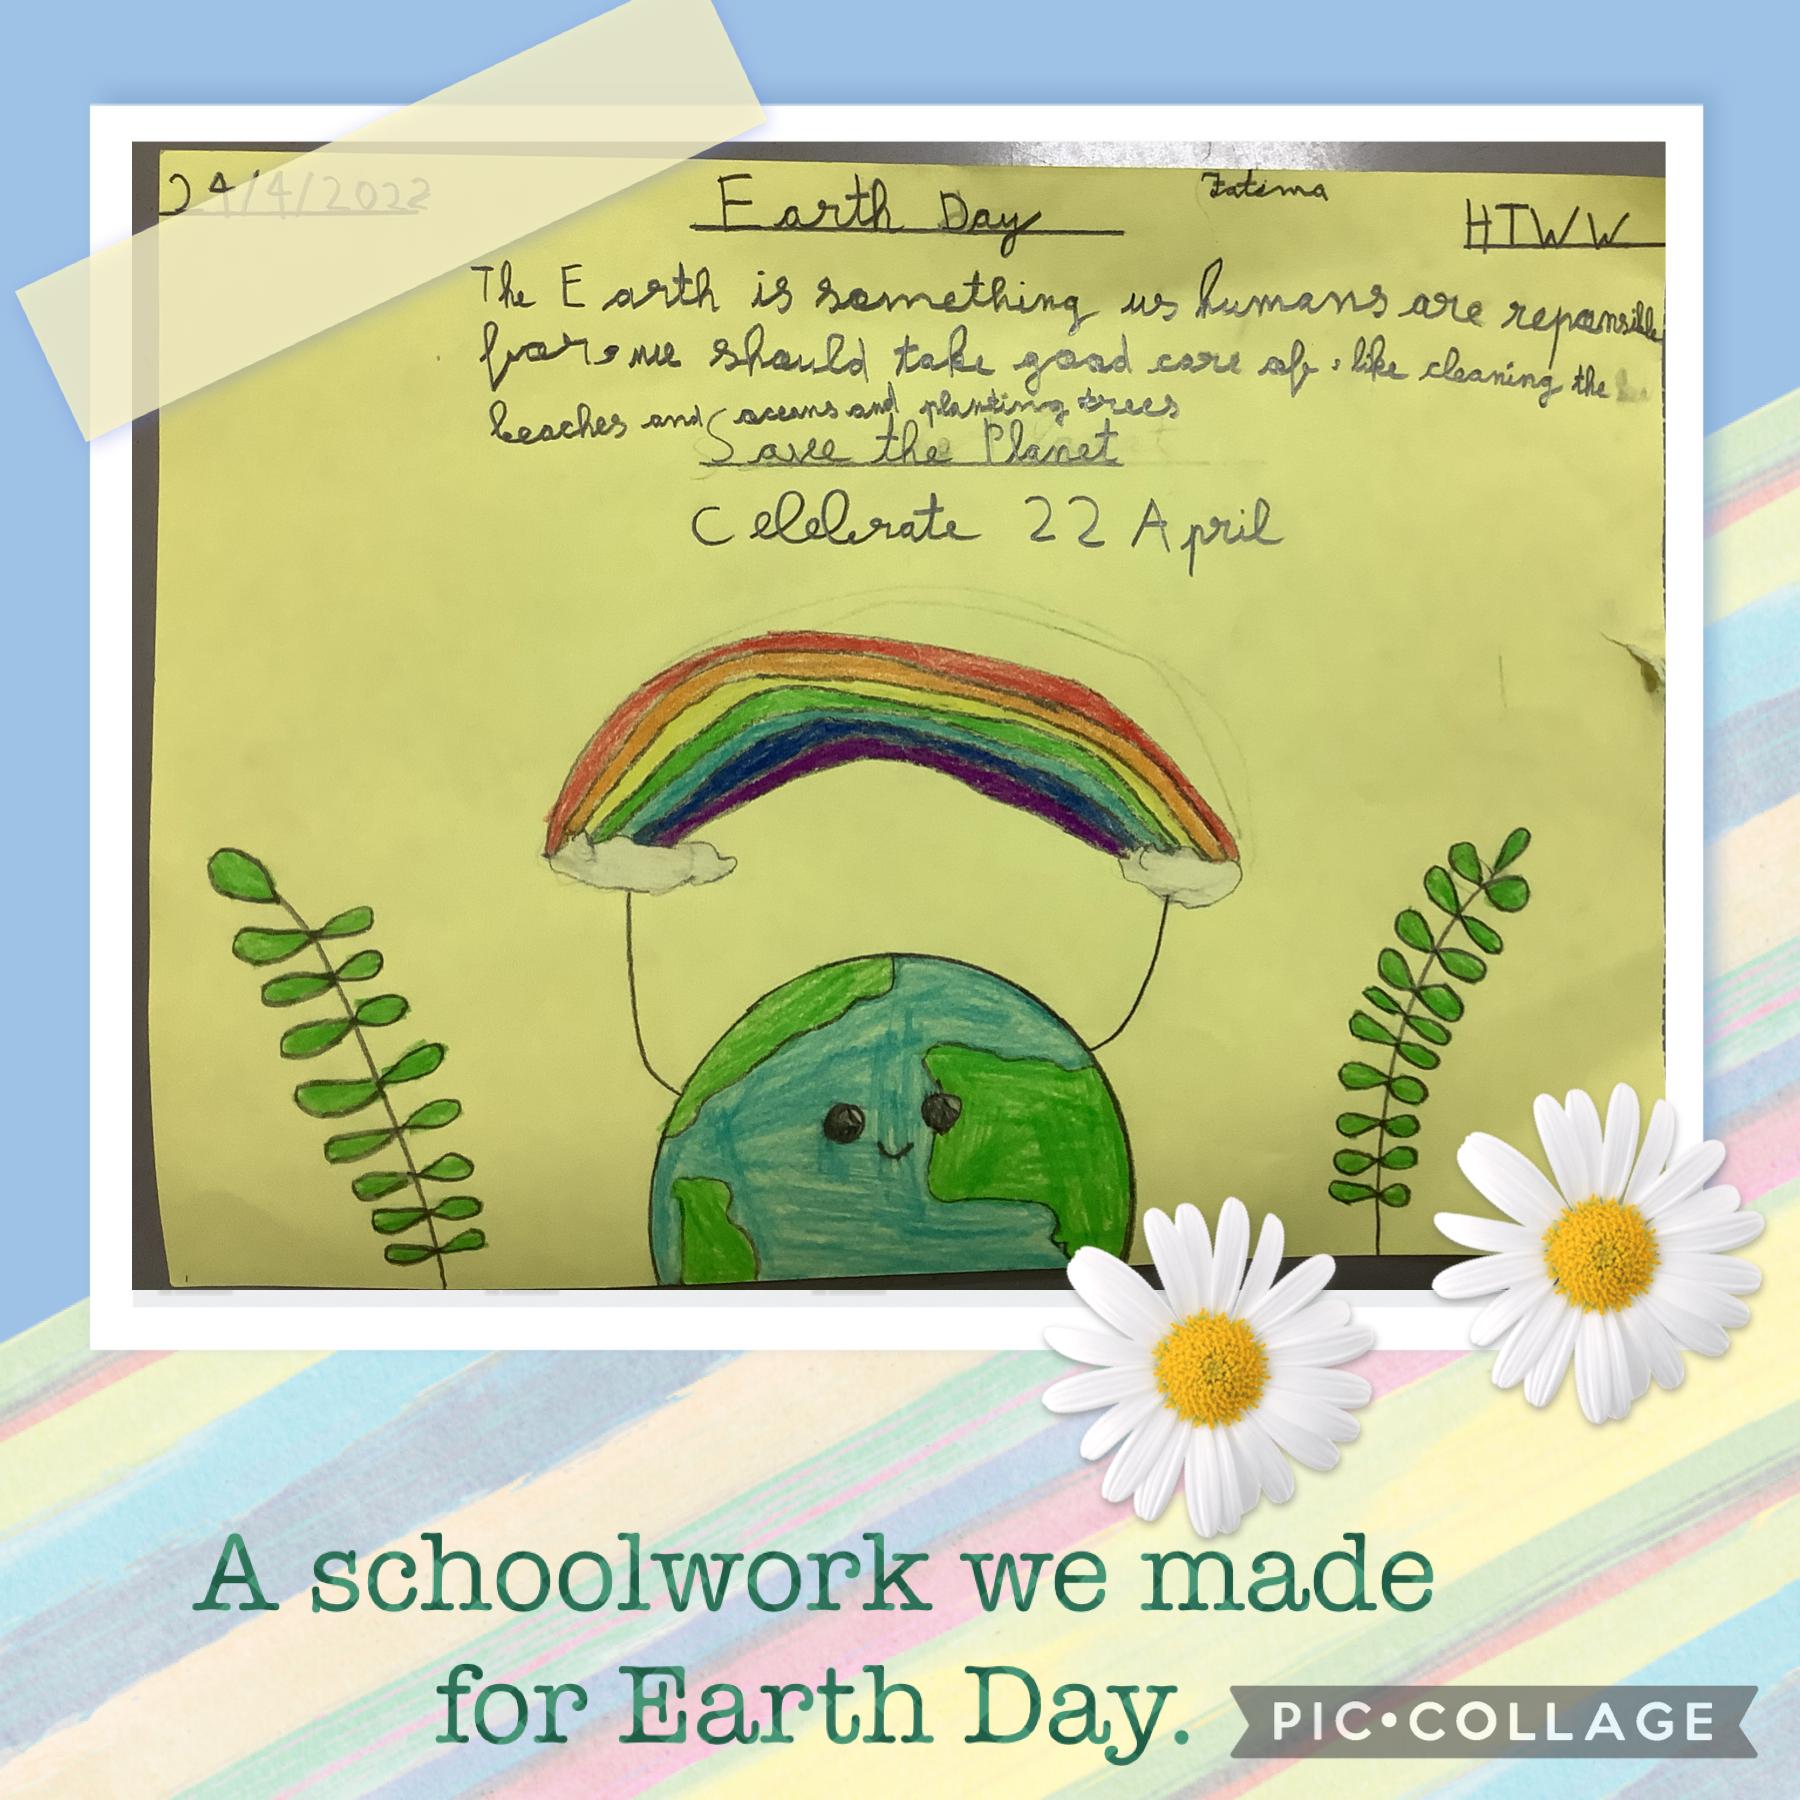 A schoolwork for Earth Day.